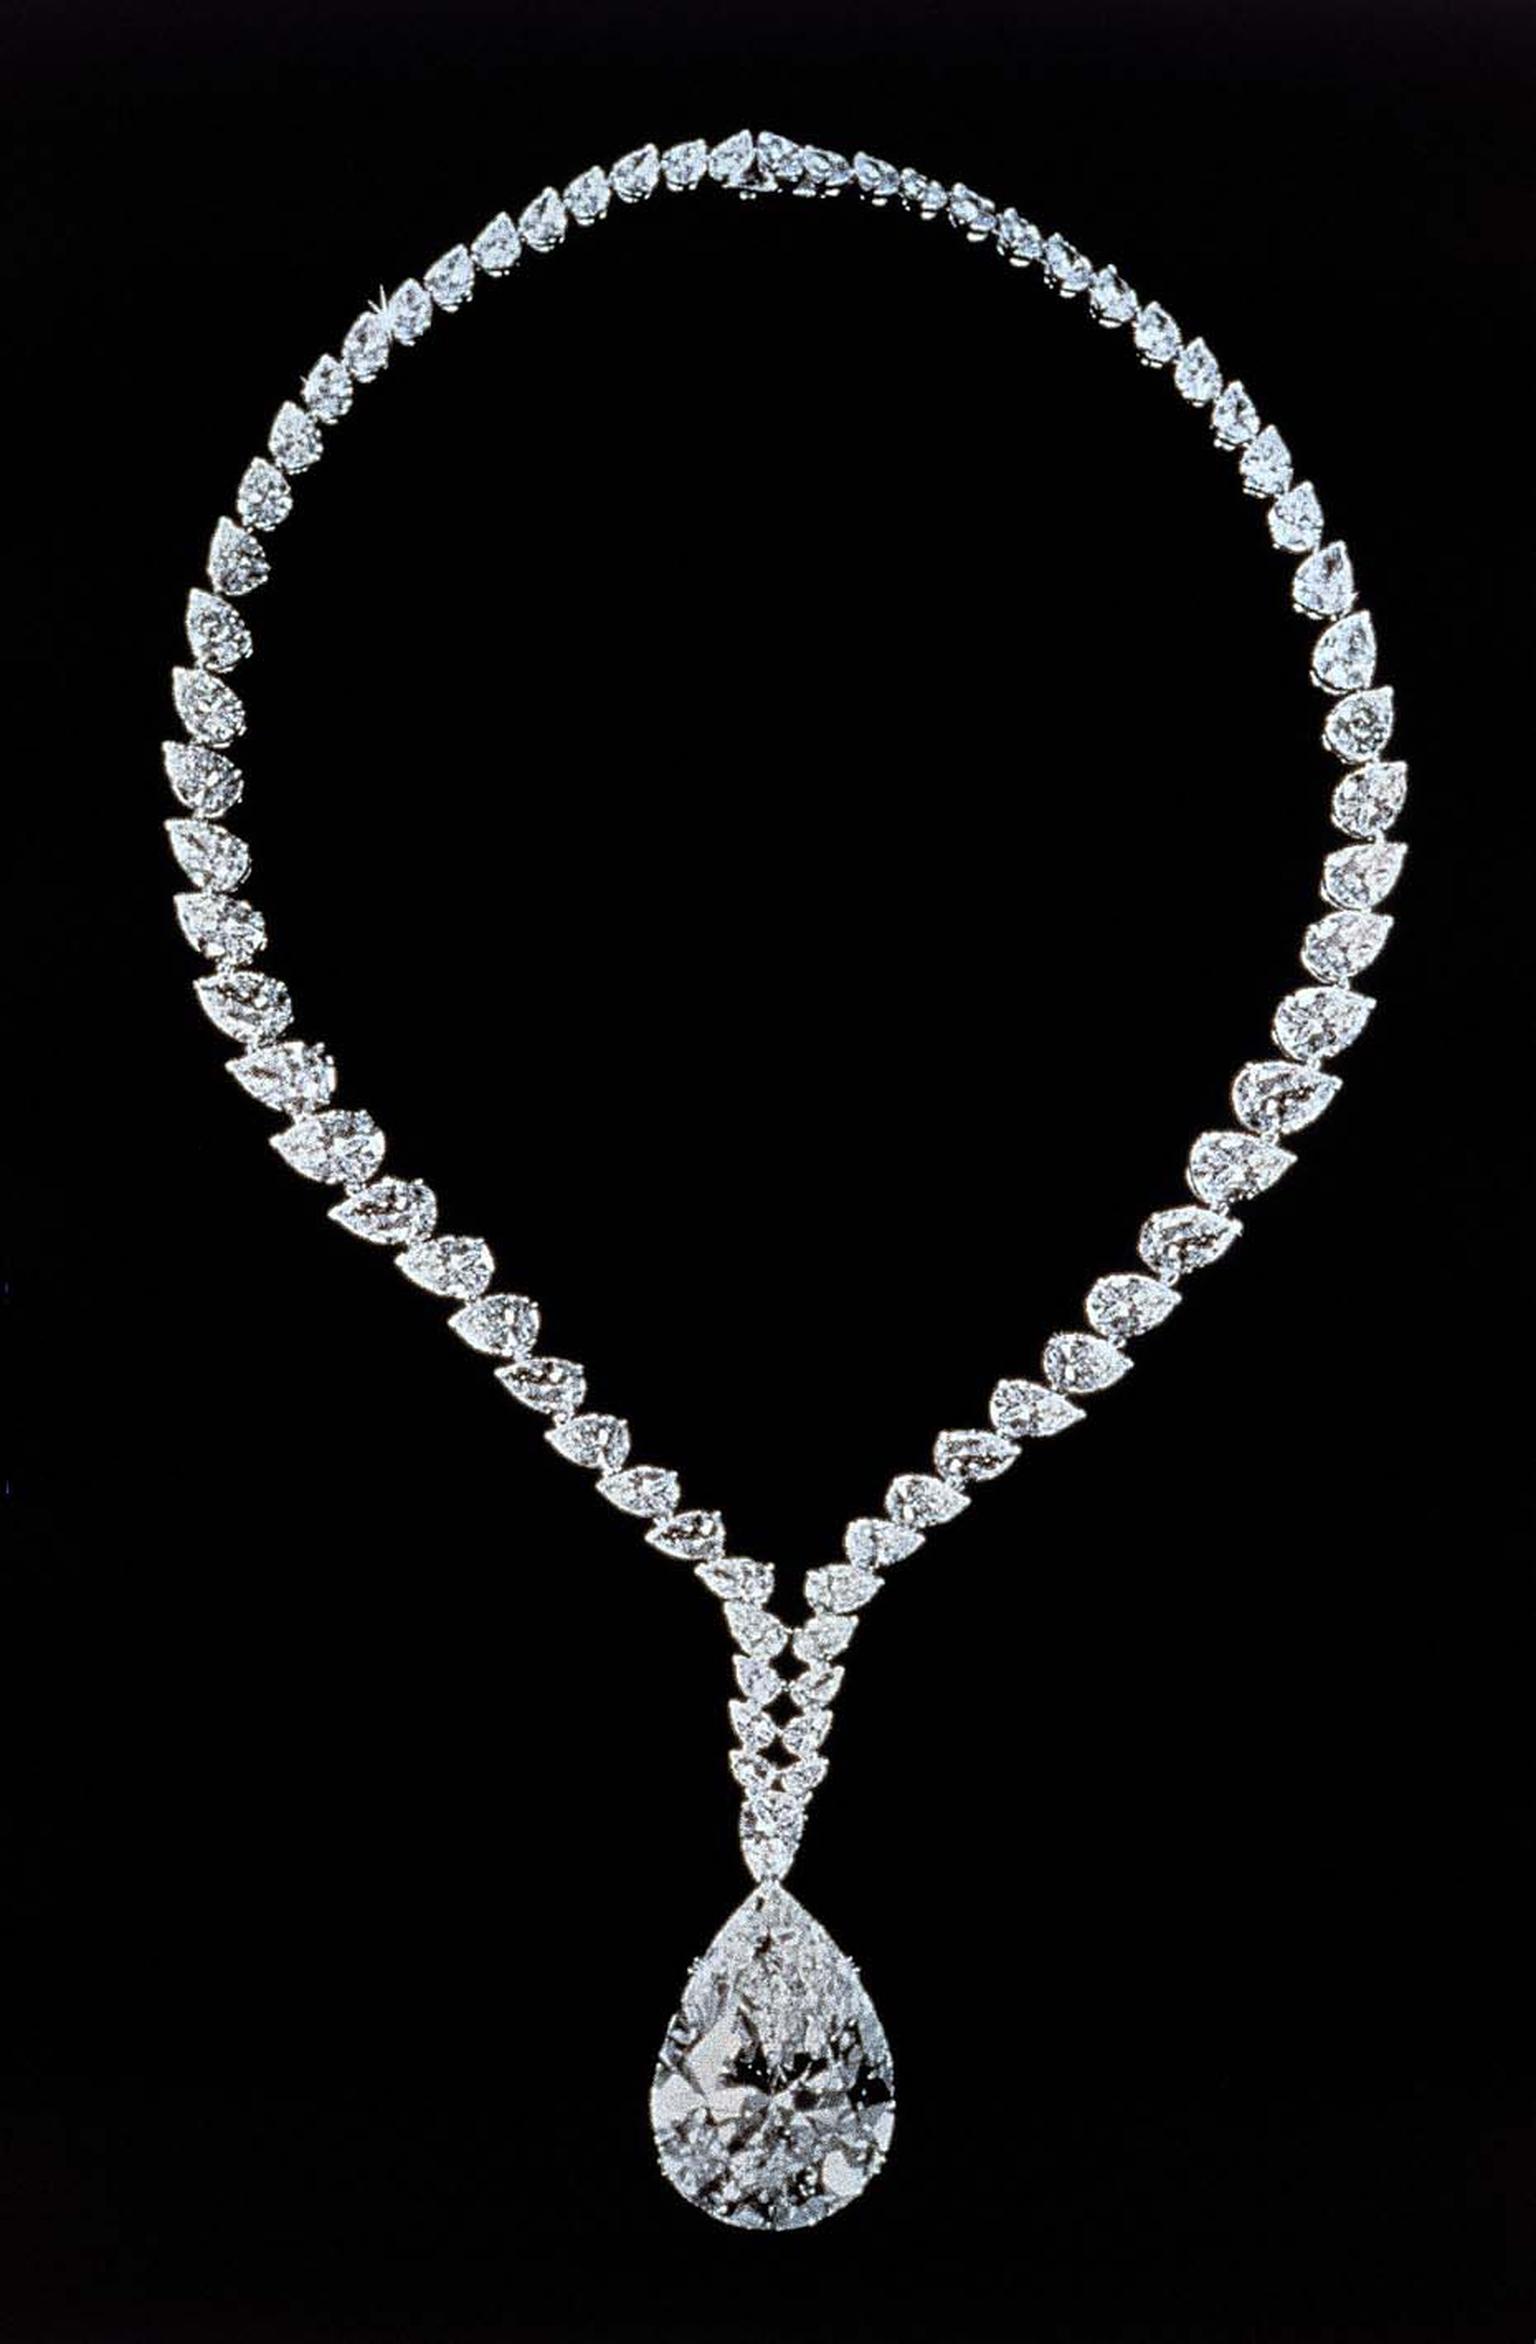 Elizabeth Taylor requested that the 69.42ct Taylor-Burton diamond - a birthday gift from her fifth husband, Richard Burton - be removed from its ring setting and set into a diamond necklace by Cartier, which she wore to the 42nd Academy Awards in April 19